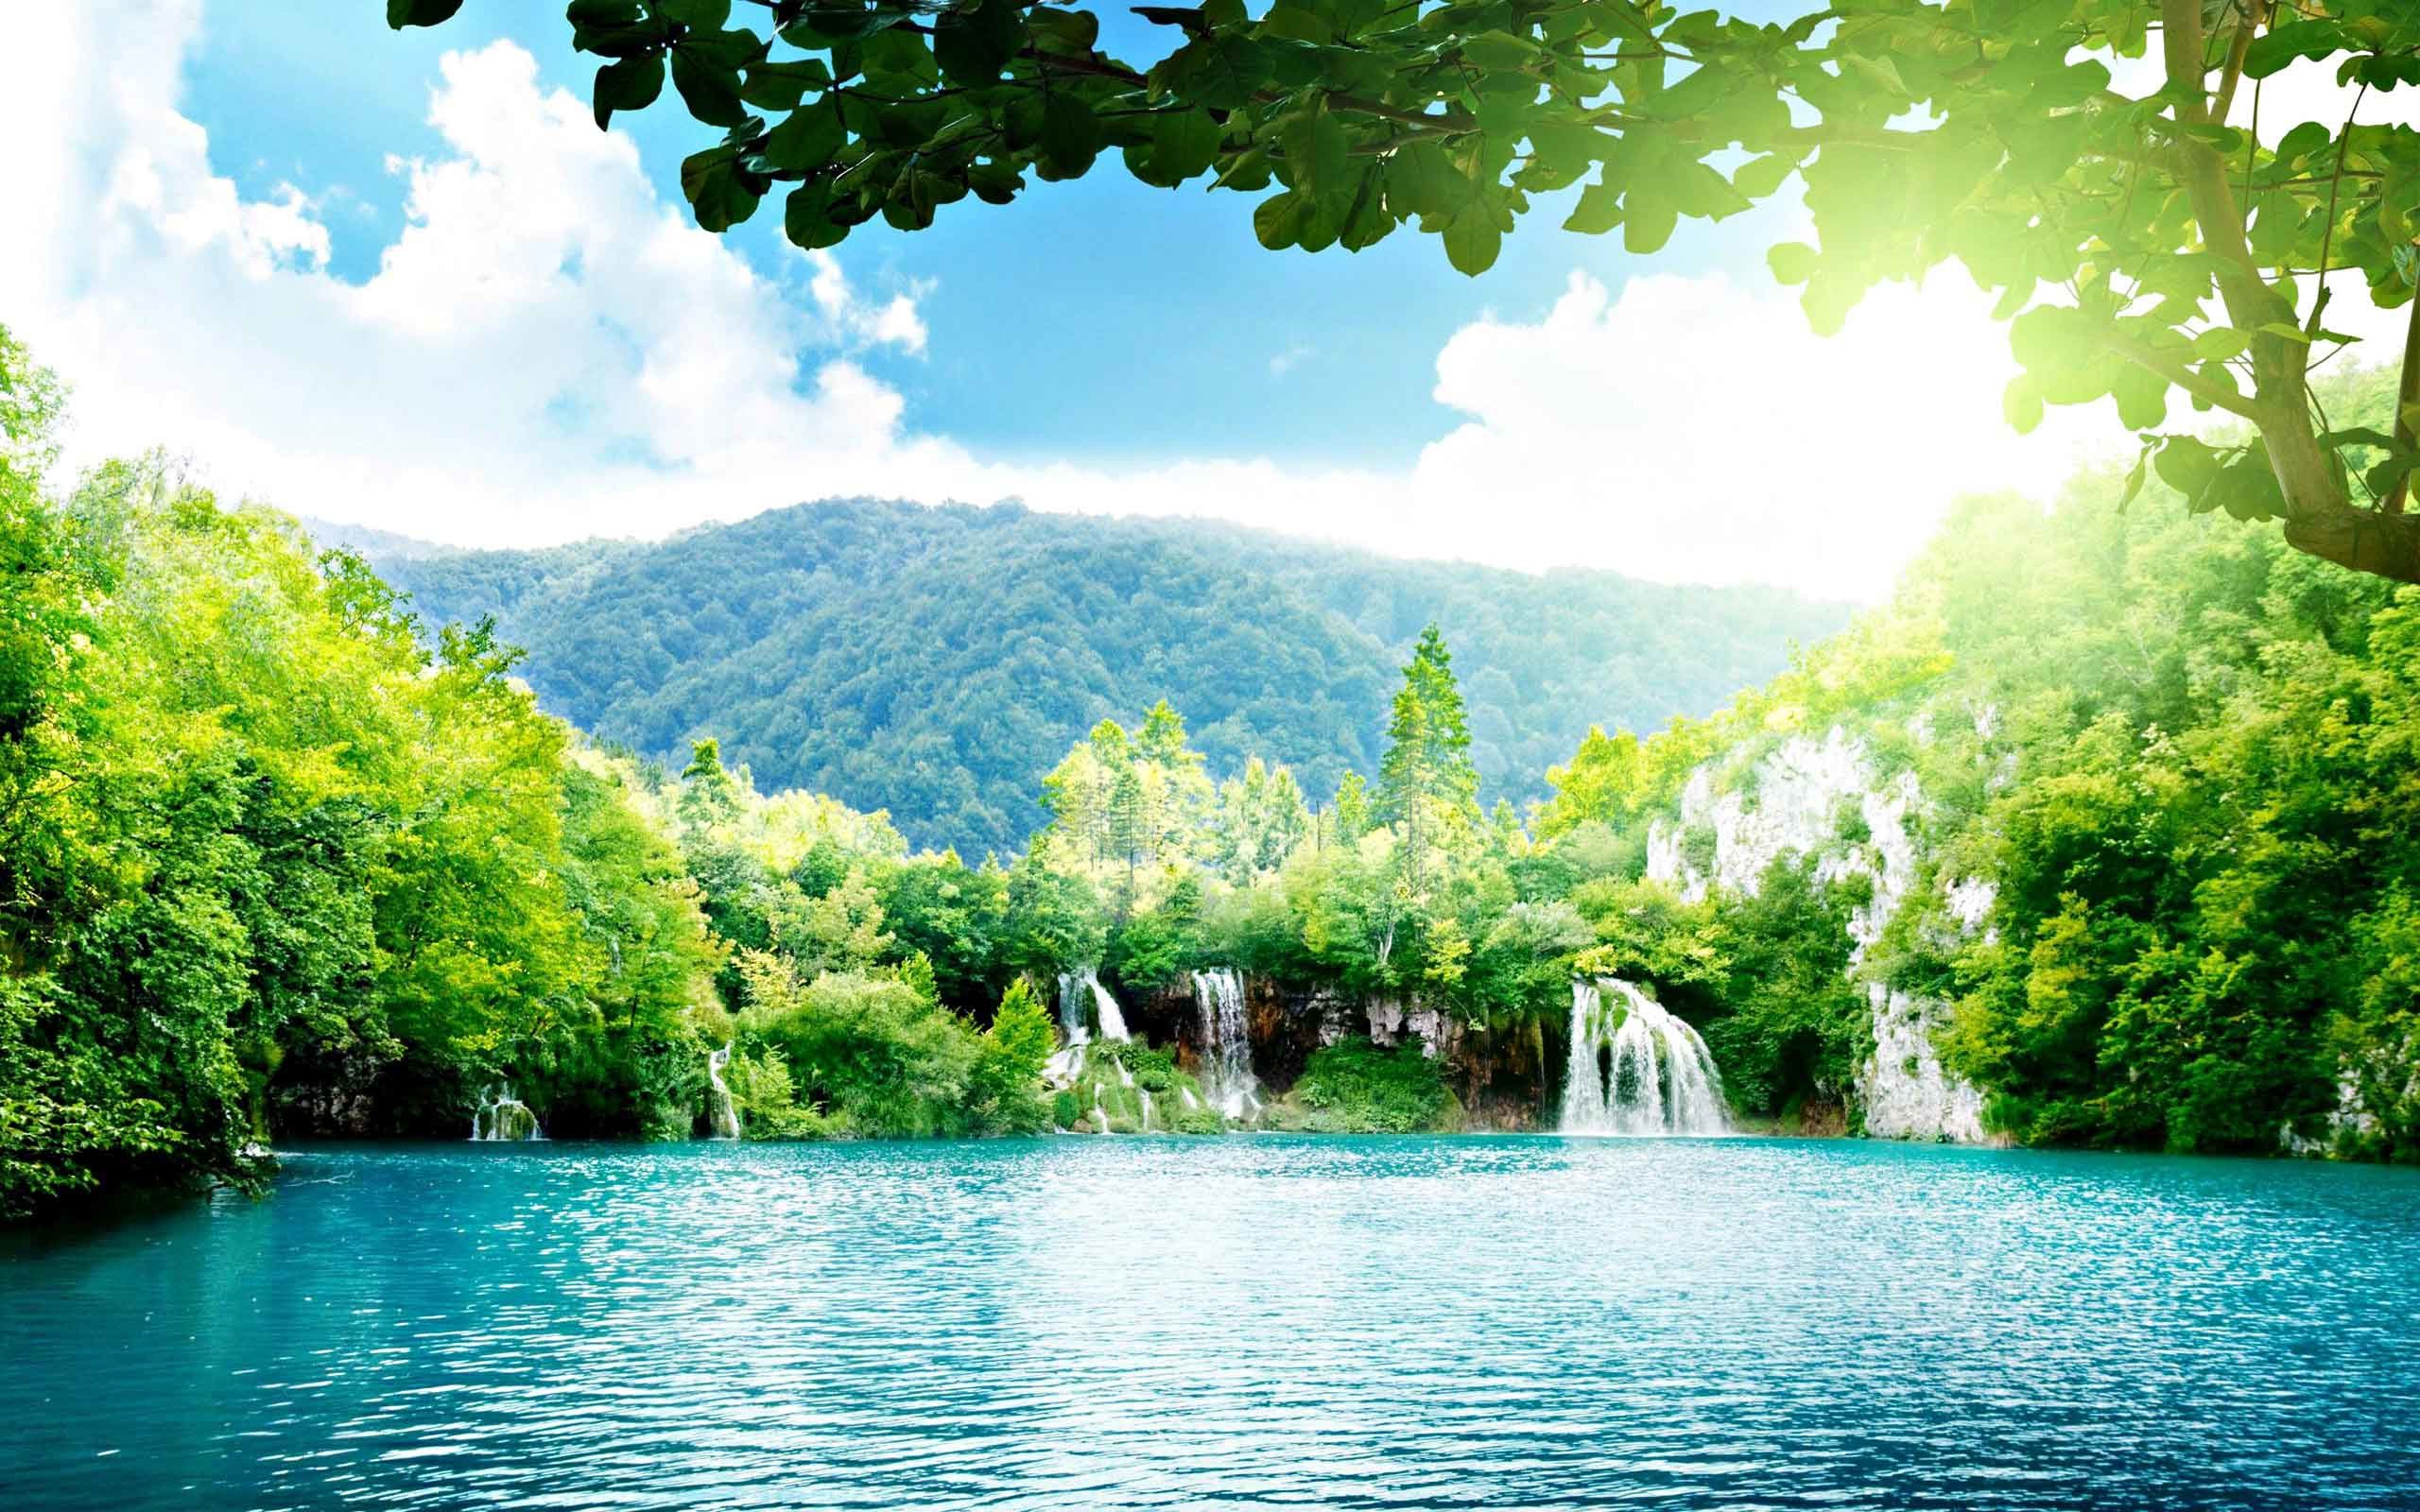 background nature wallpapers,natural landscape,nature,water resources,body of water,water